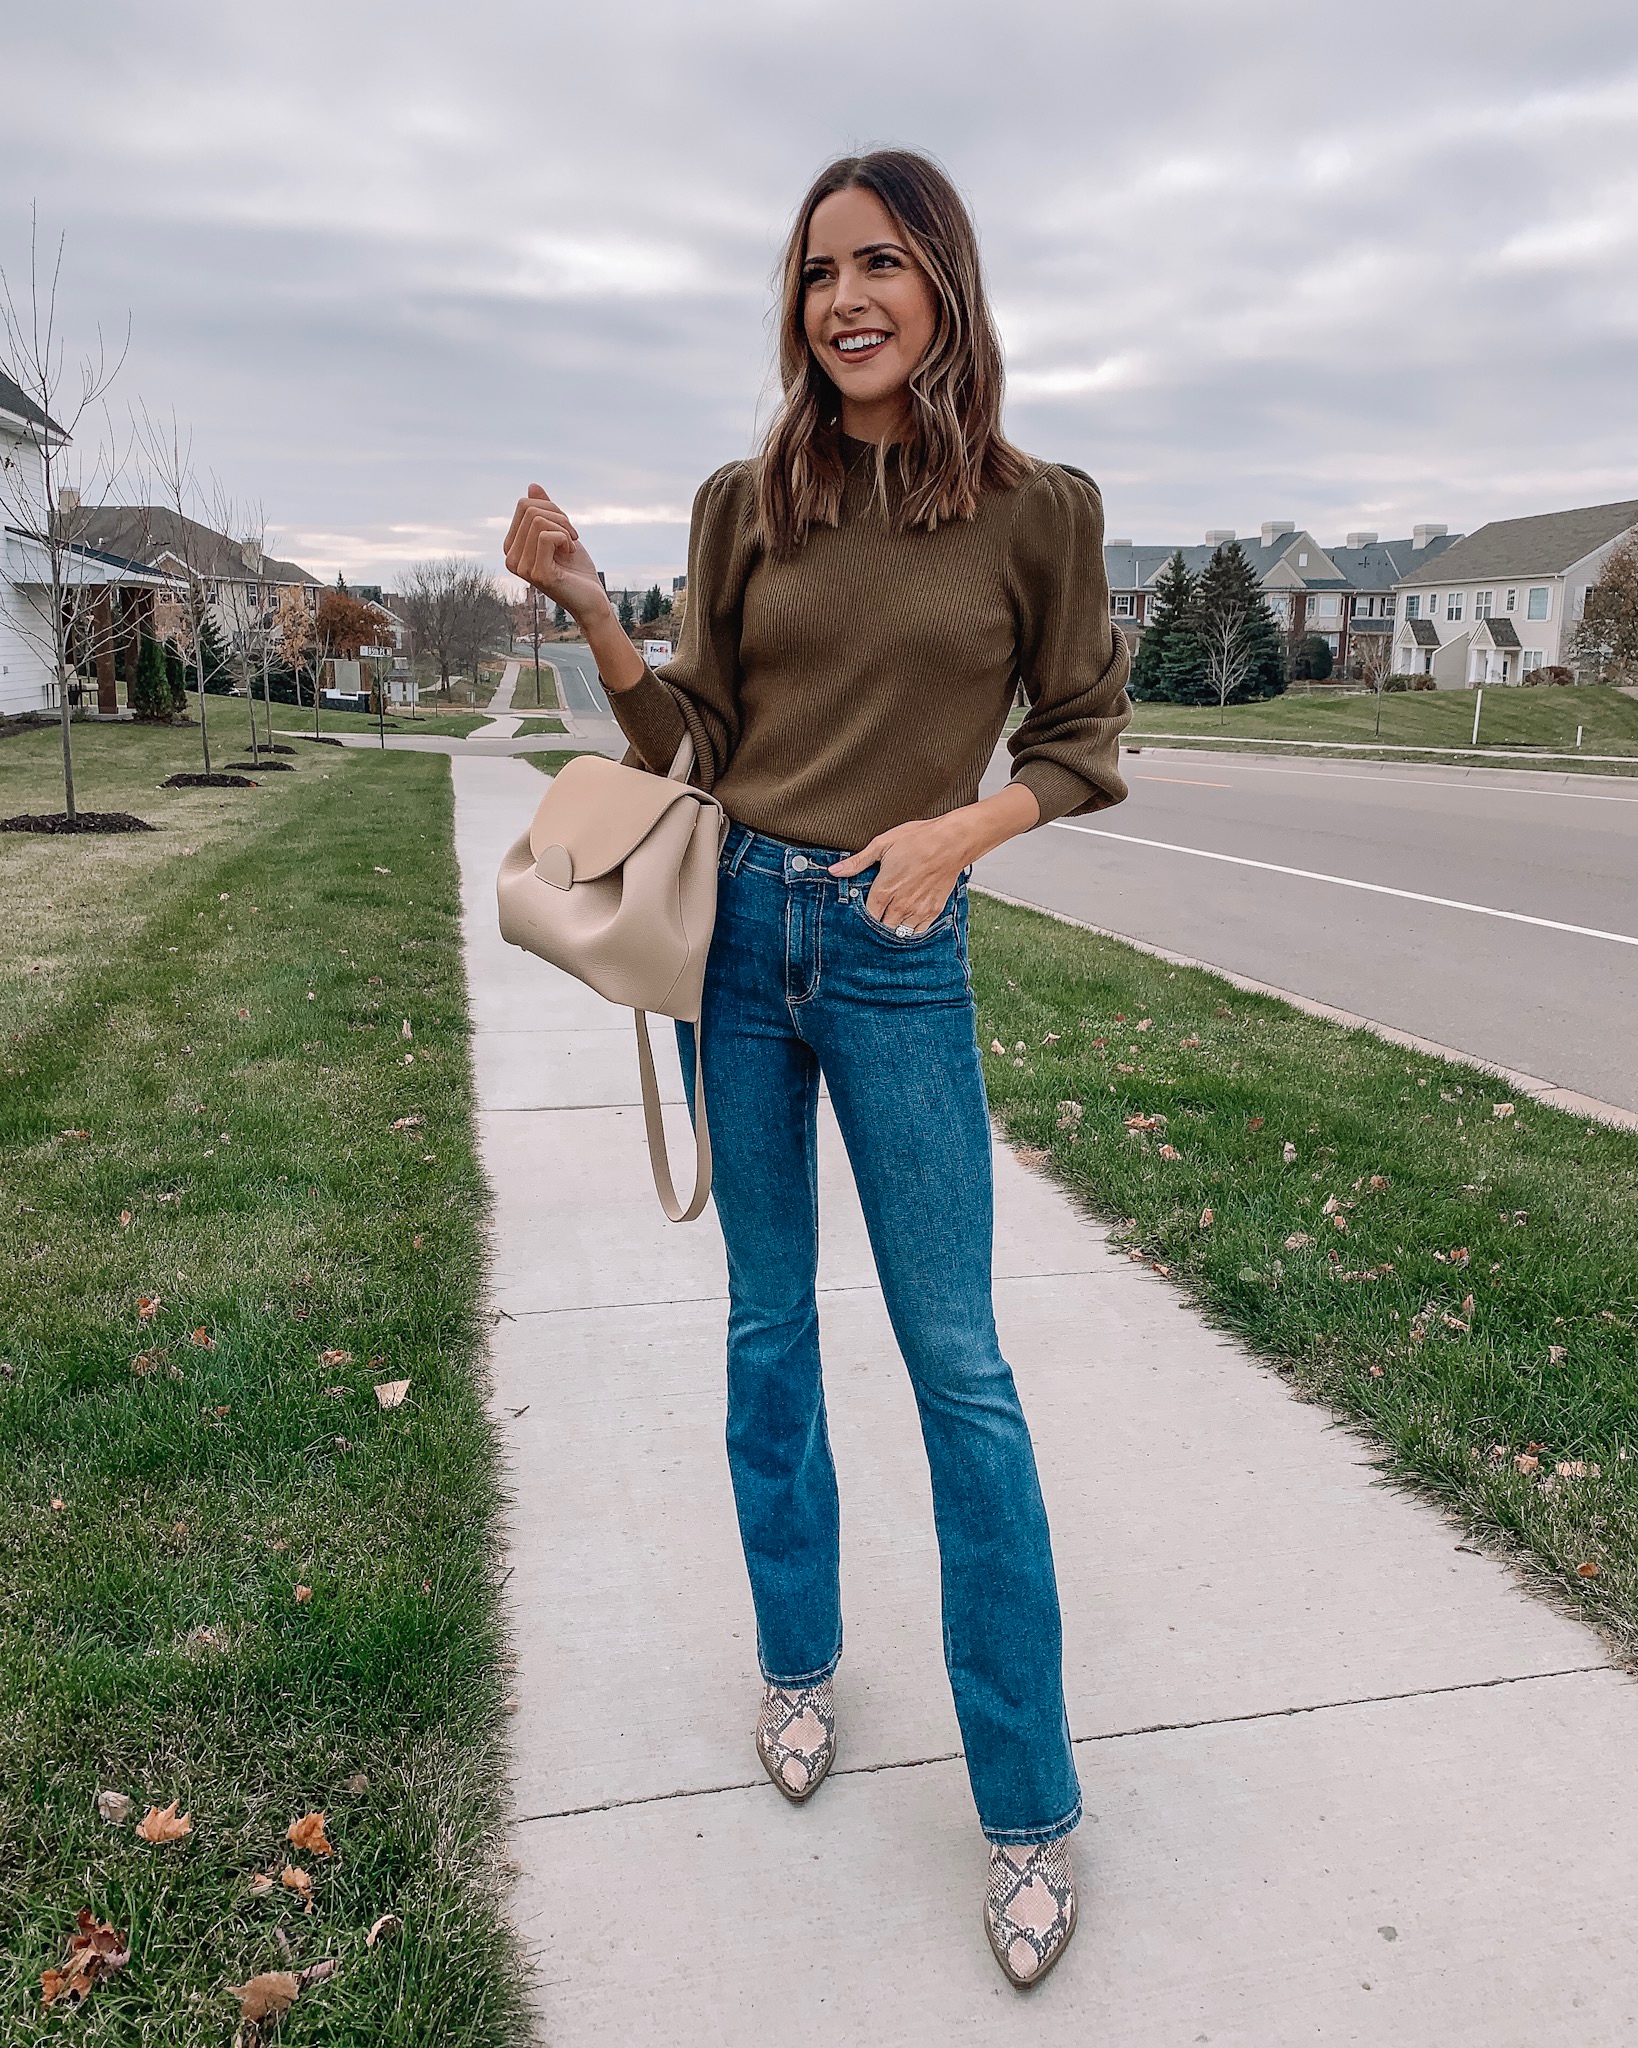 banana republic, women's outfit, workwear, casual chic outfit, flare jeans, fall fashion